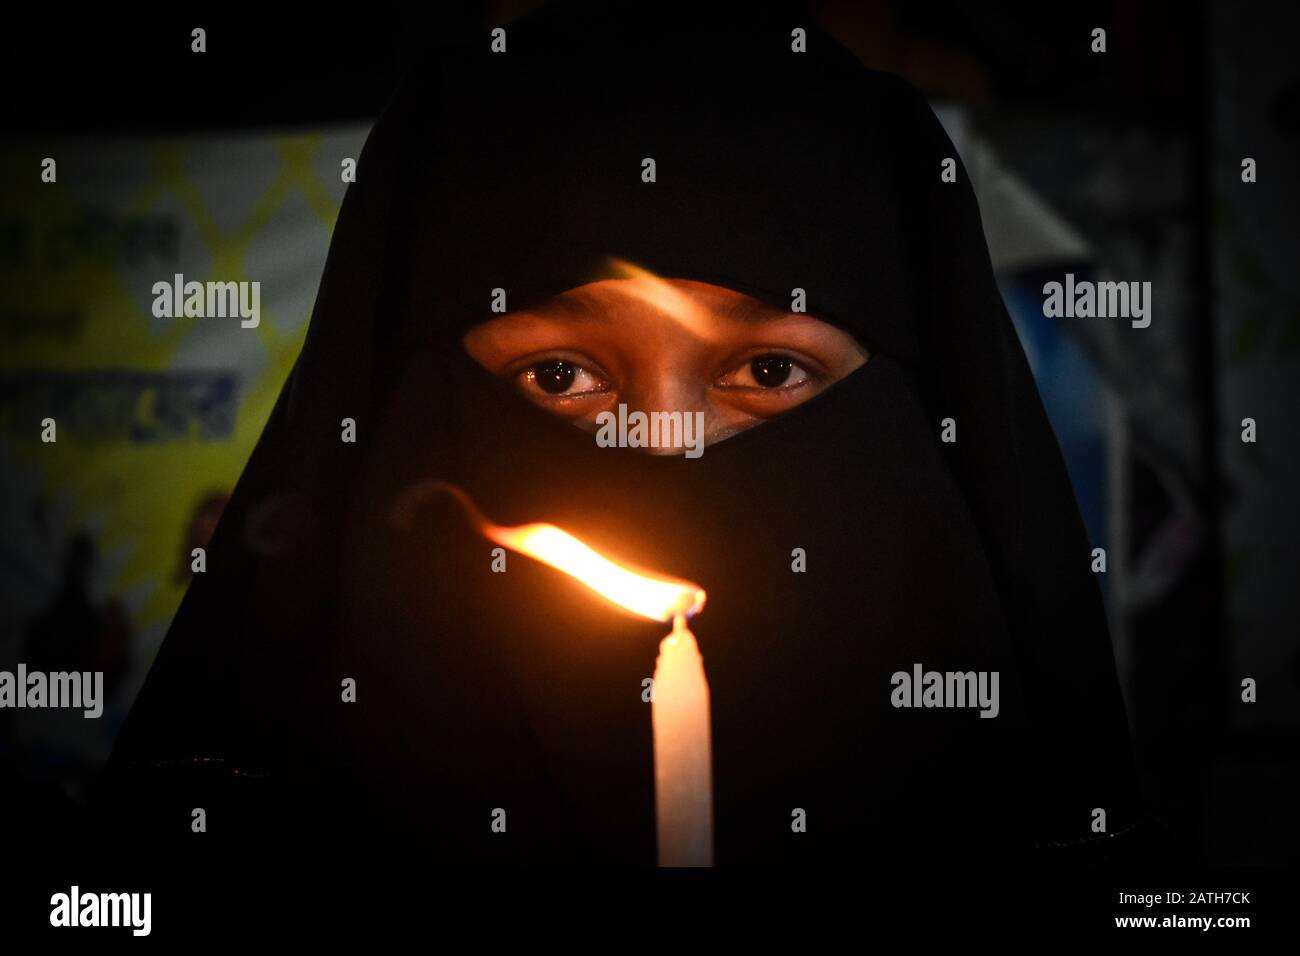 A Muslim woman is holding a candle on a candle march rally for protesting rape and woman's harassment in Kolkata, India. Stock Photo